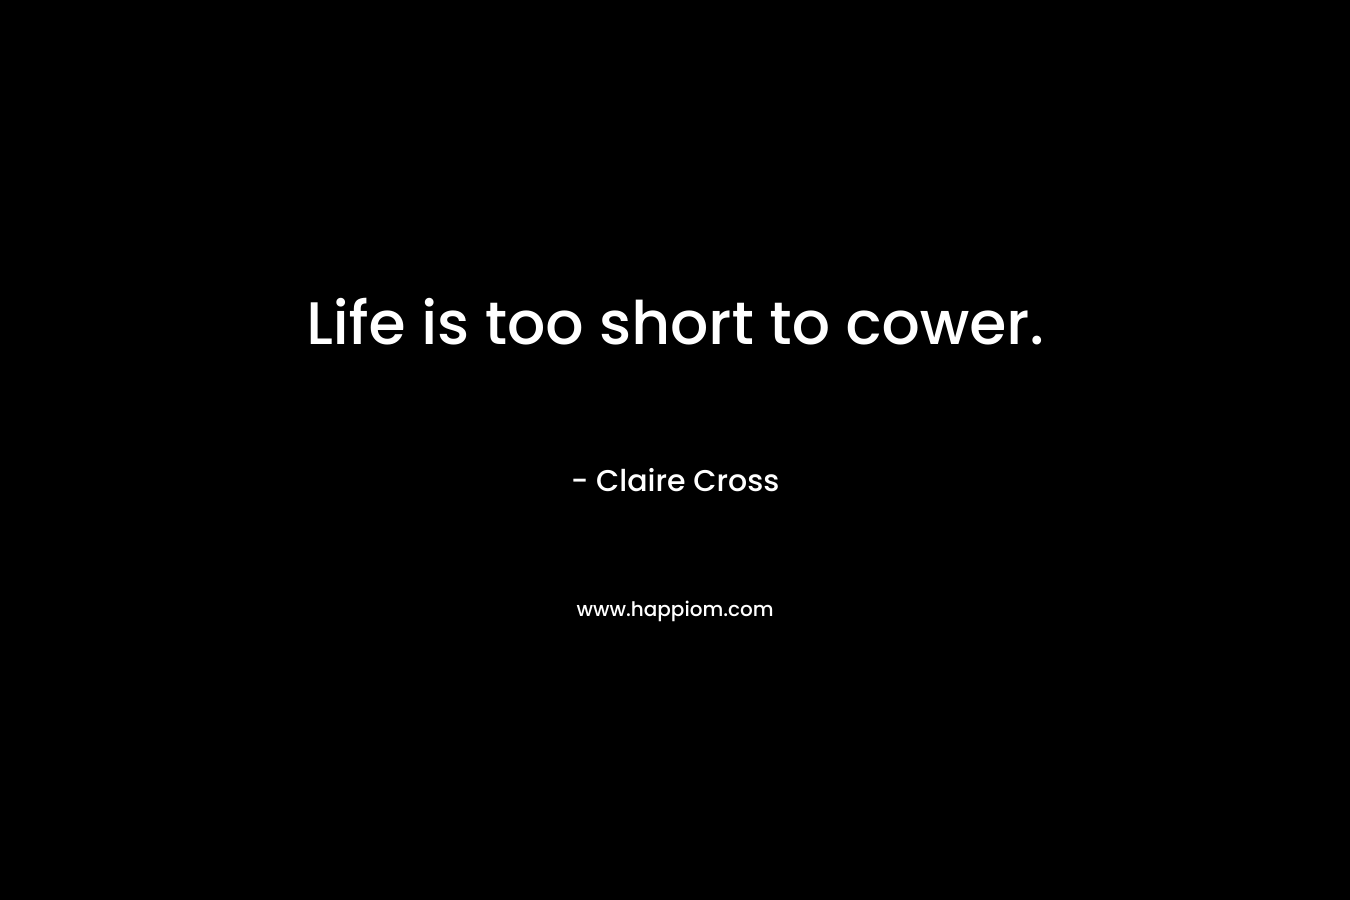 Life is too short to cower.